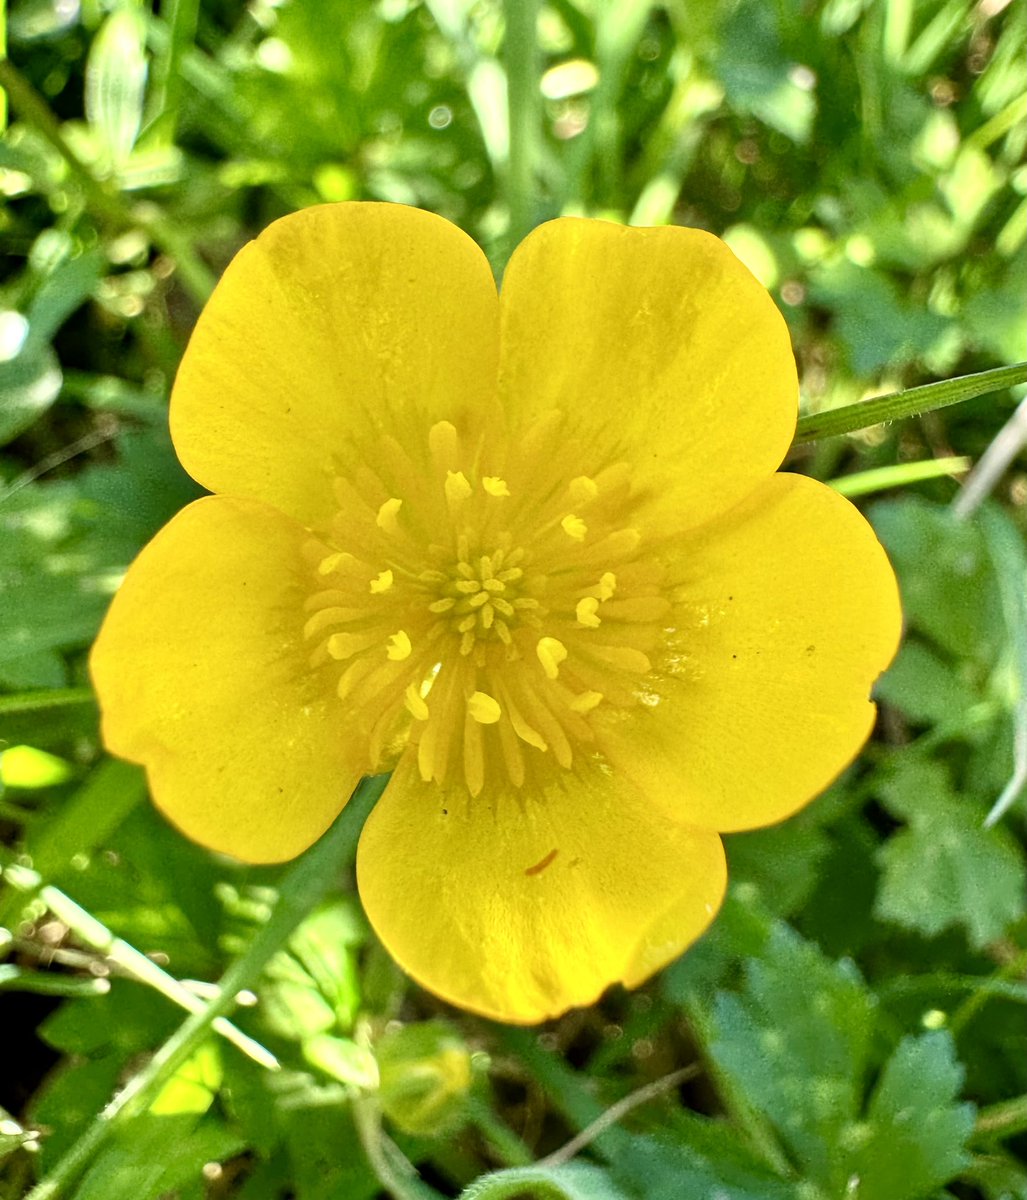 Good morning everyone happy Sunday, have the best day possible wherever you are, whatever your plans #SundayYellow spreading sunshine and smiles #Buttercup small, beautiful and bright 😊 #BekindAlways #PeaceAndLove #Garden @X